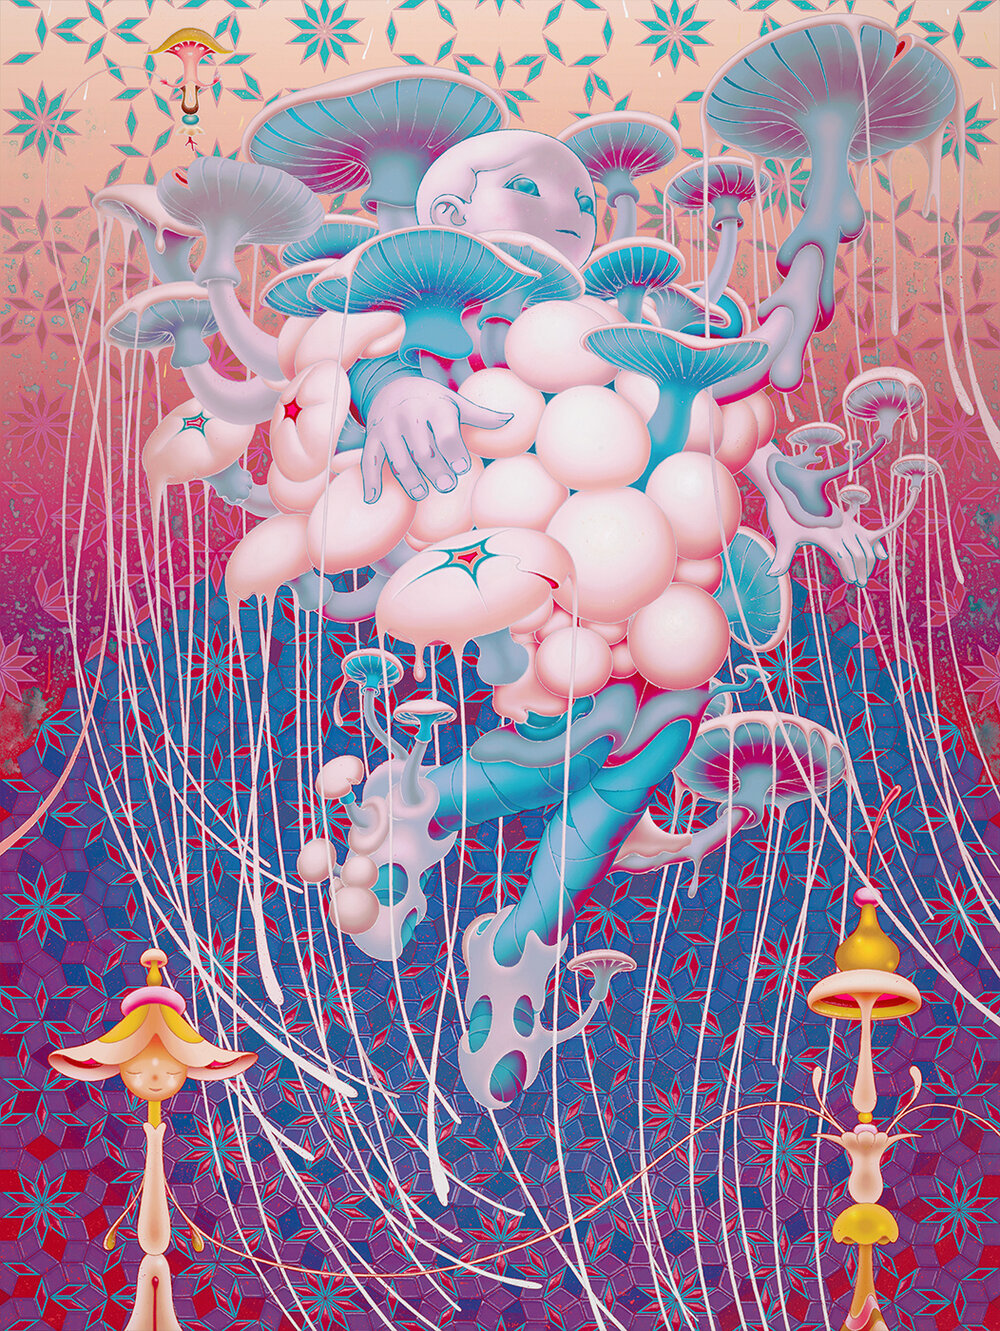 Champignon painting by James Jean for Jimin (of BTS)